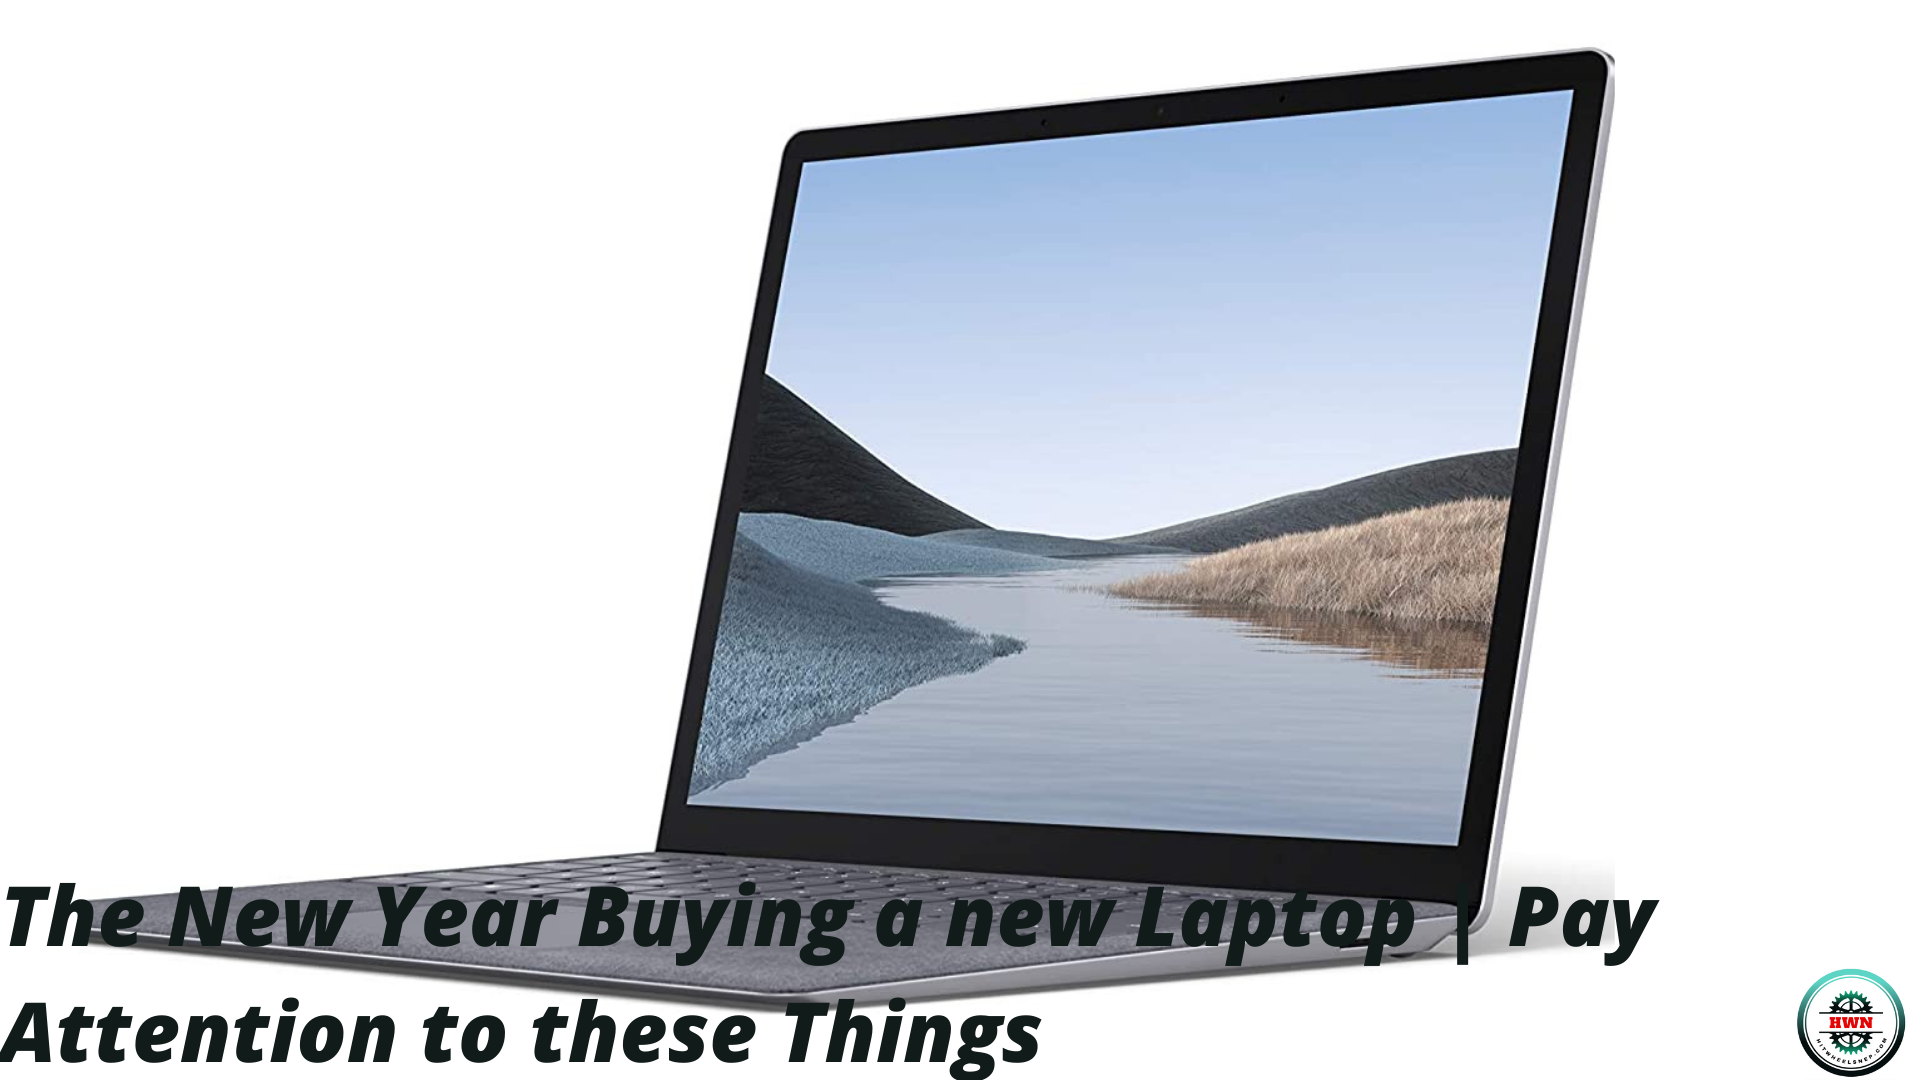 The New Year Buying a new Laptop | Pay Attention to these Things